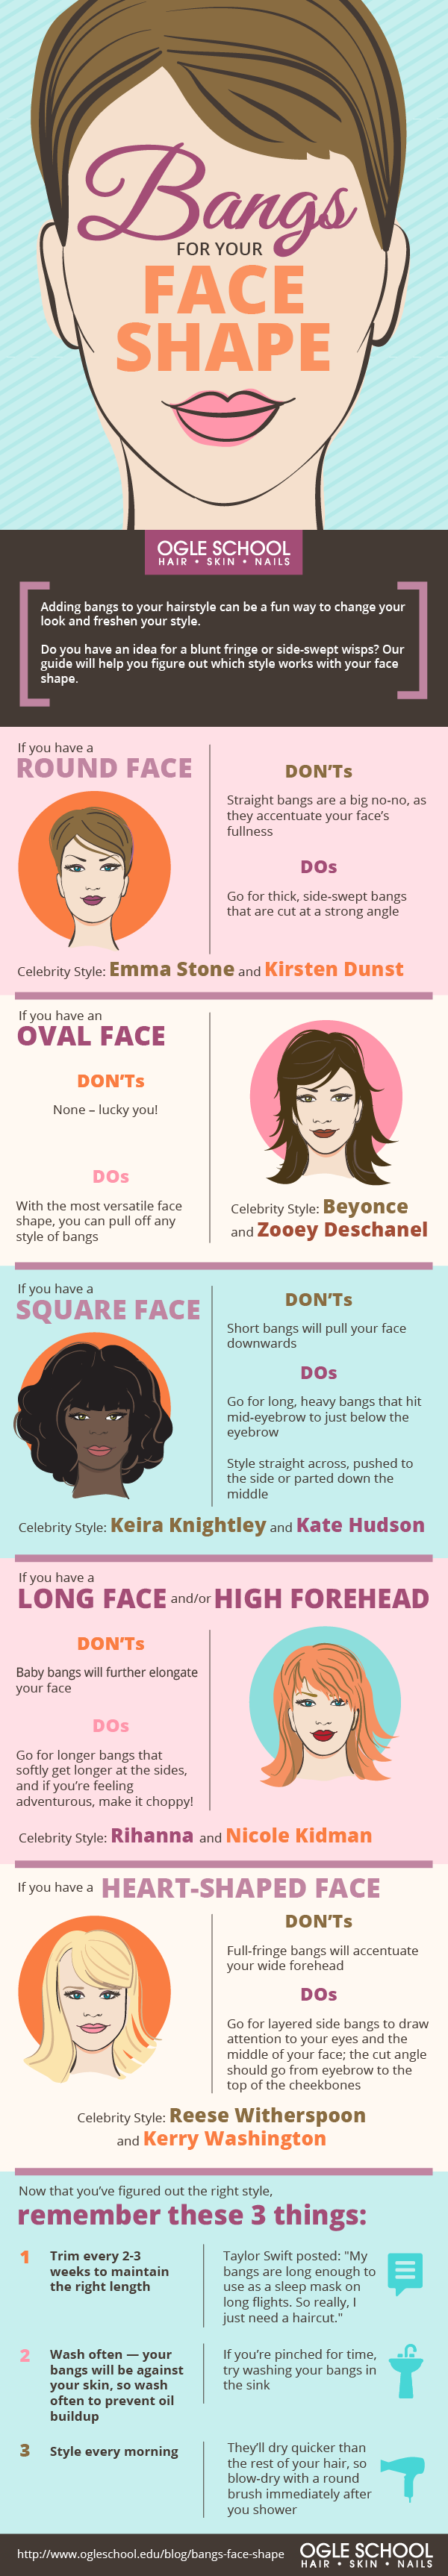 How to Choose the Right Bangs for Your Face Shape